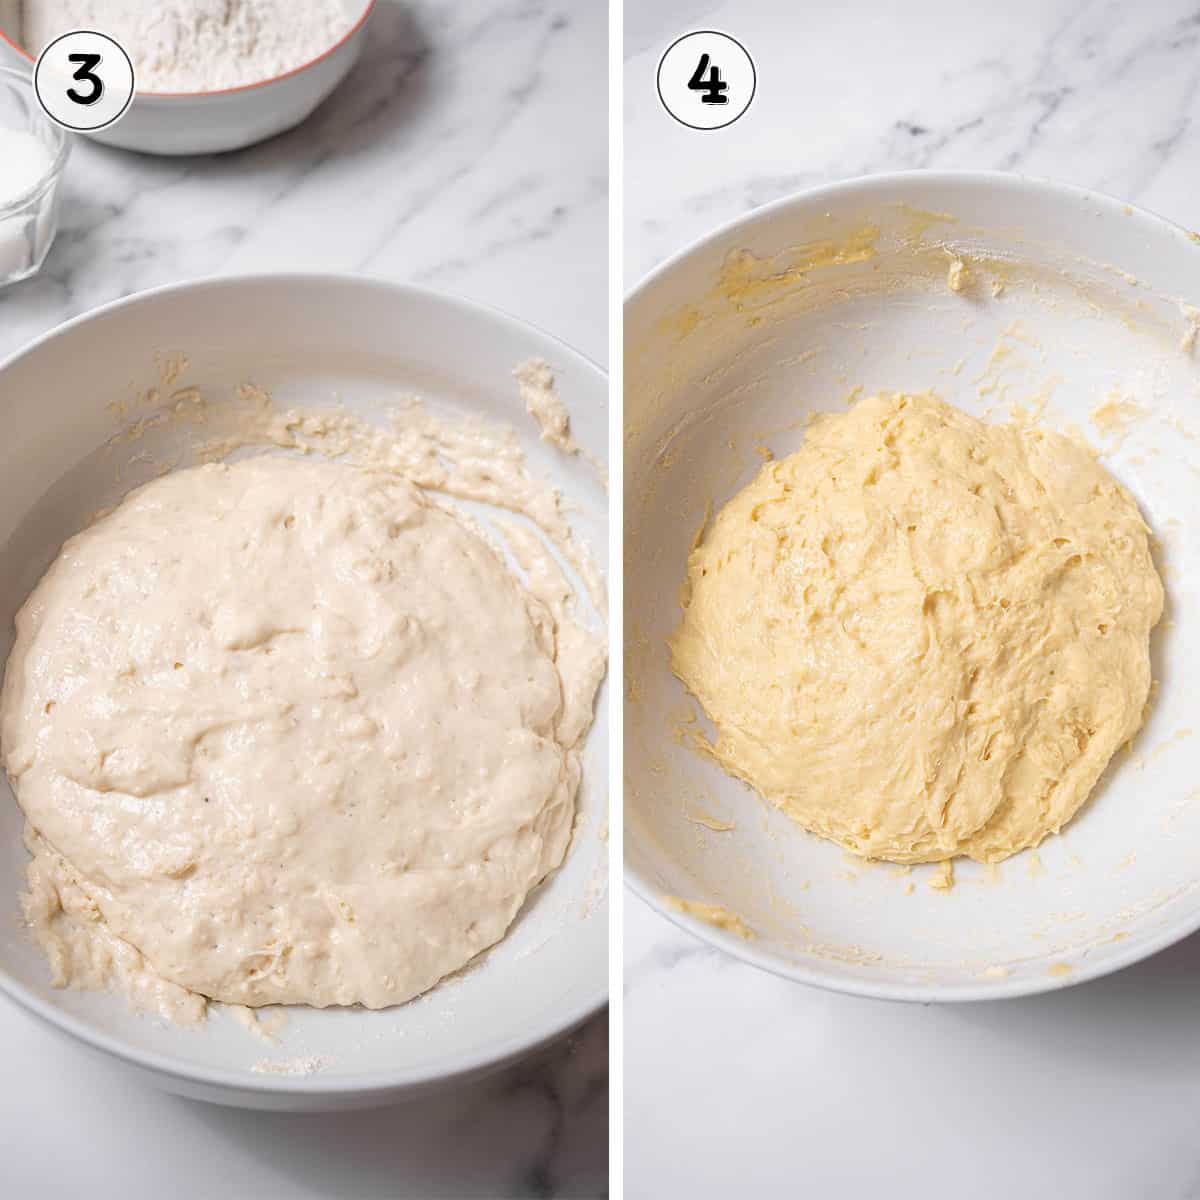 risen dough before and after adding the eggs, sugar, and flour.